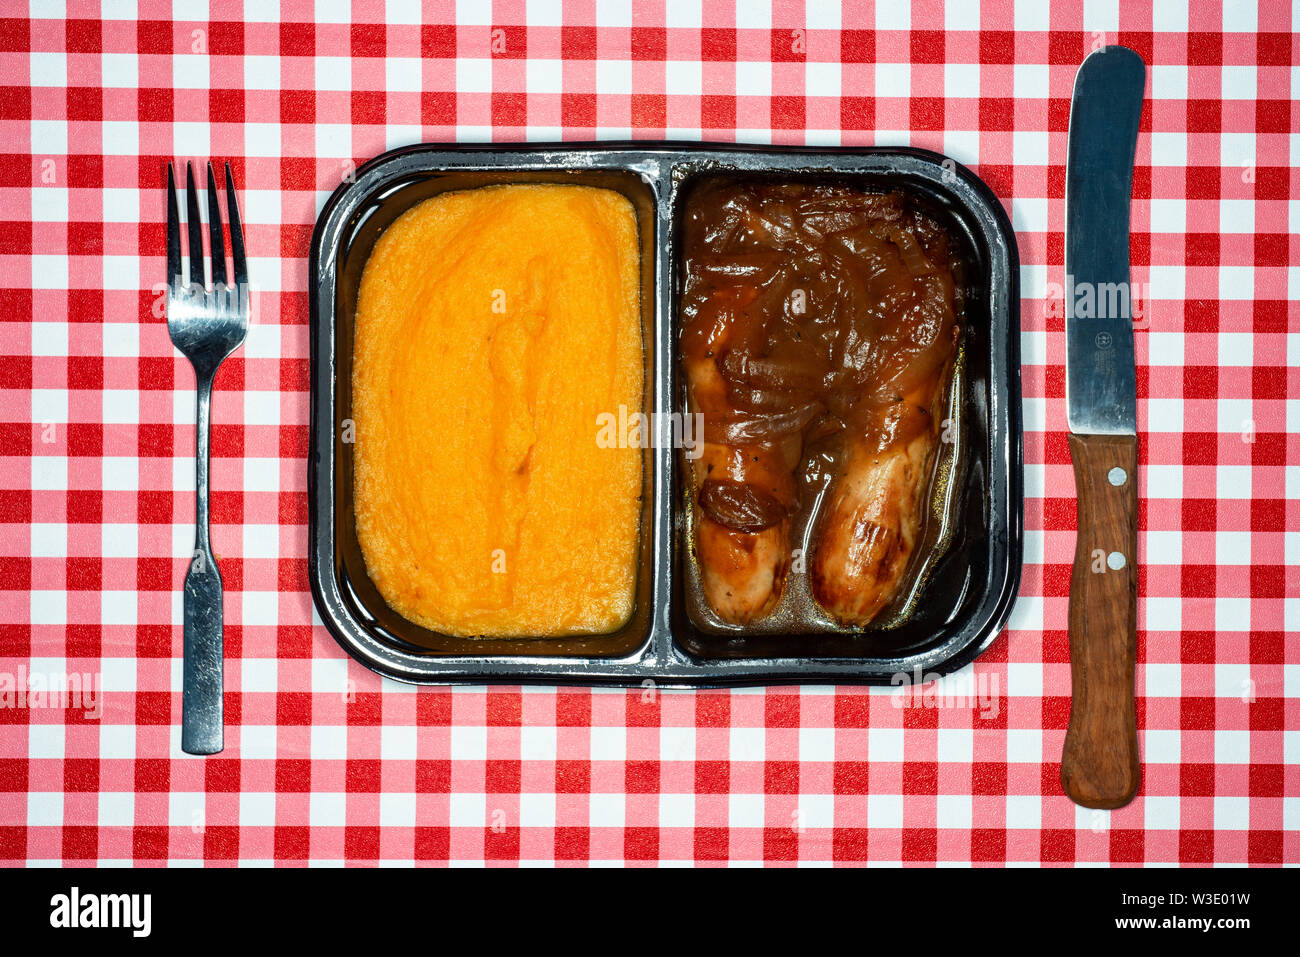 Microwave oven meal Stock Photo